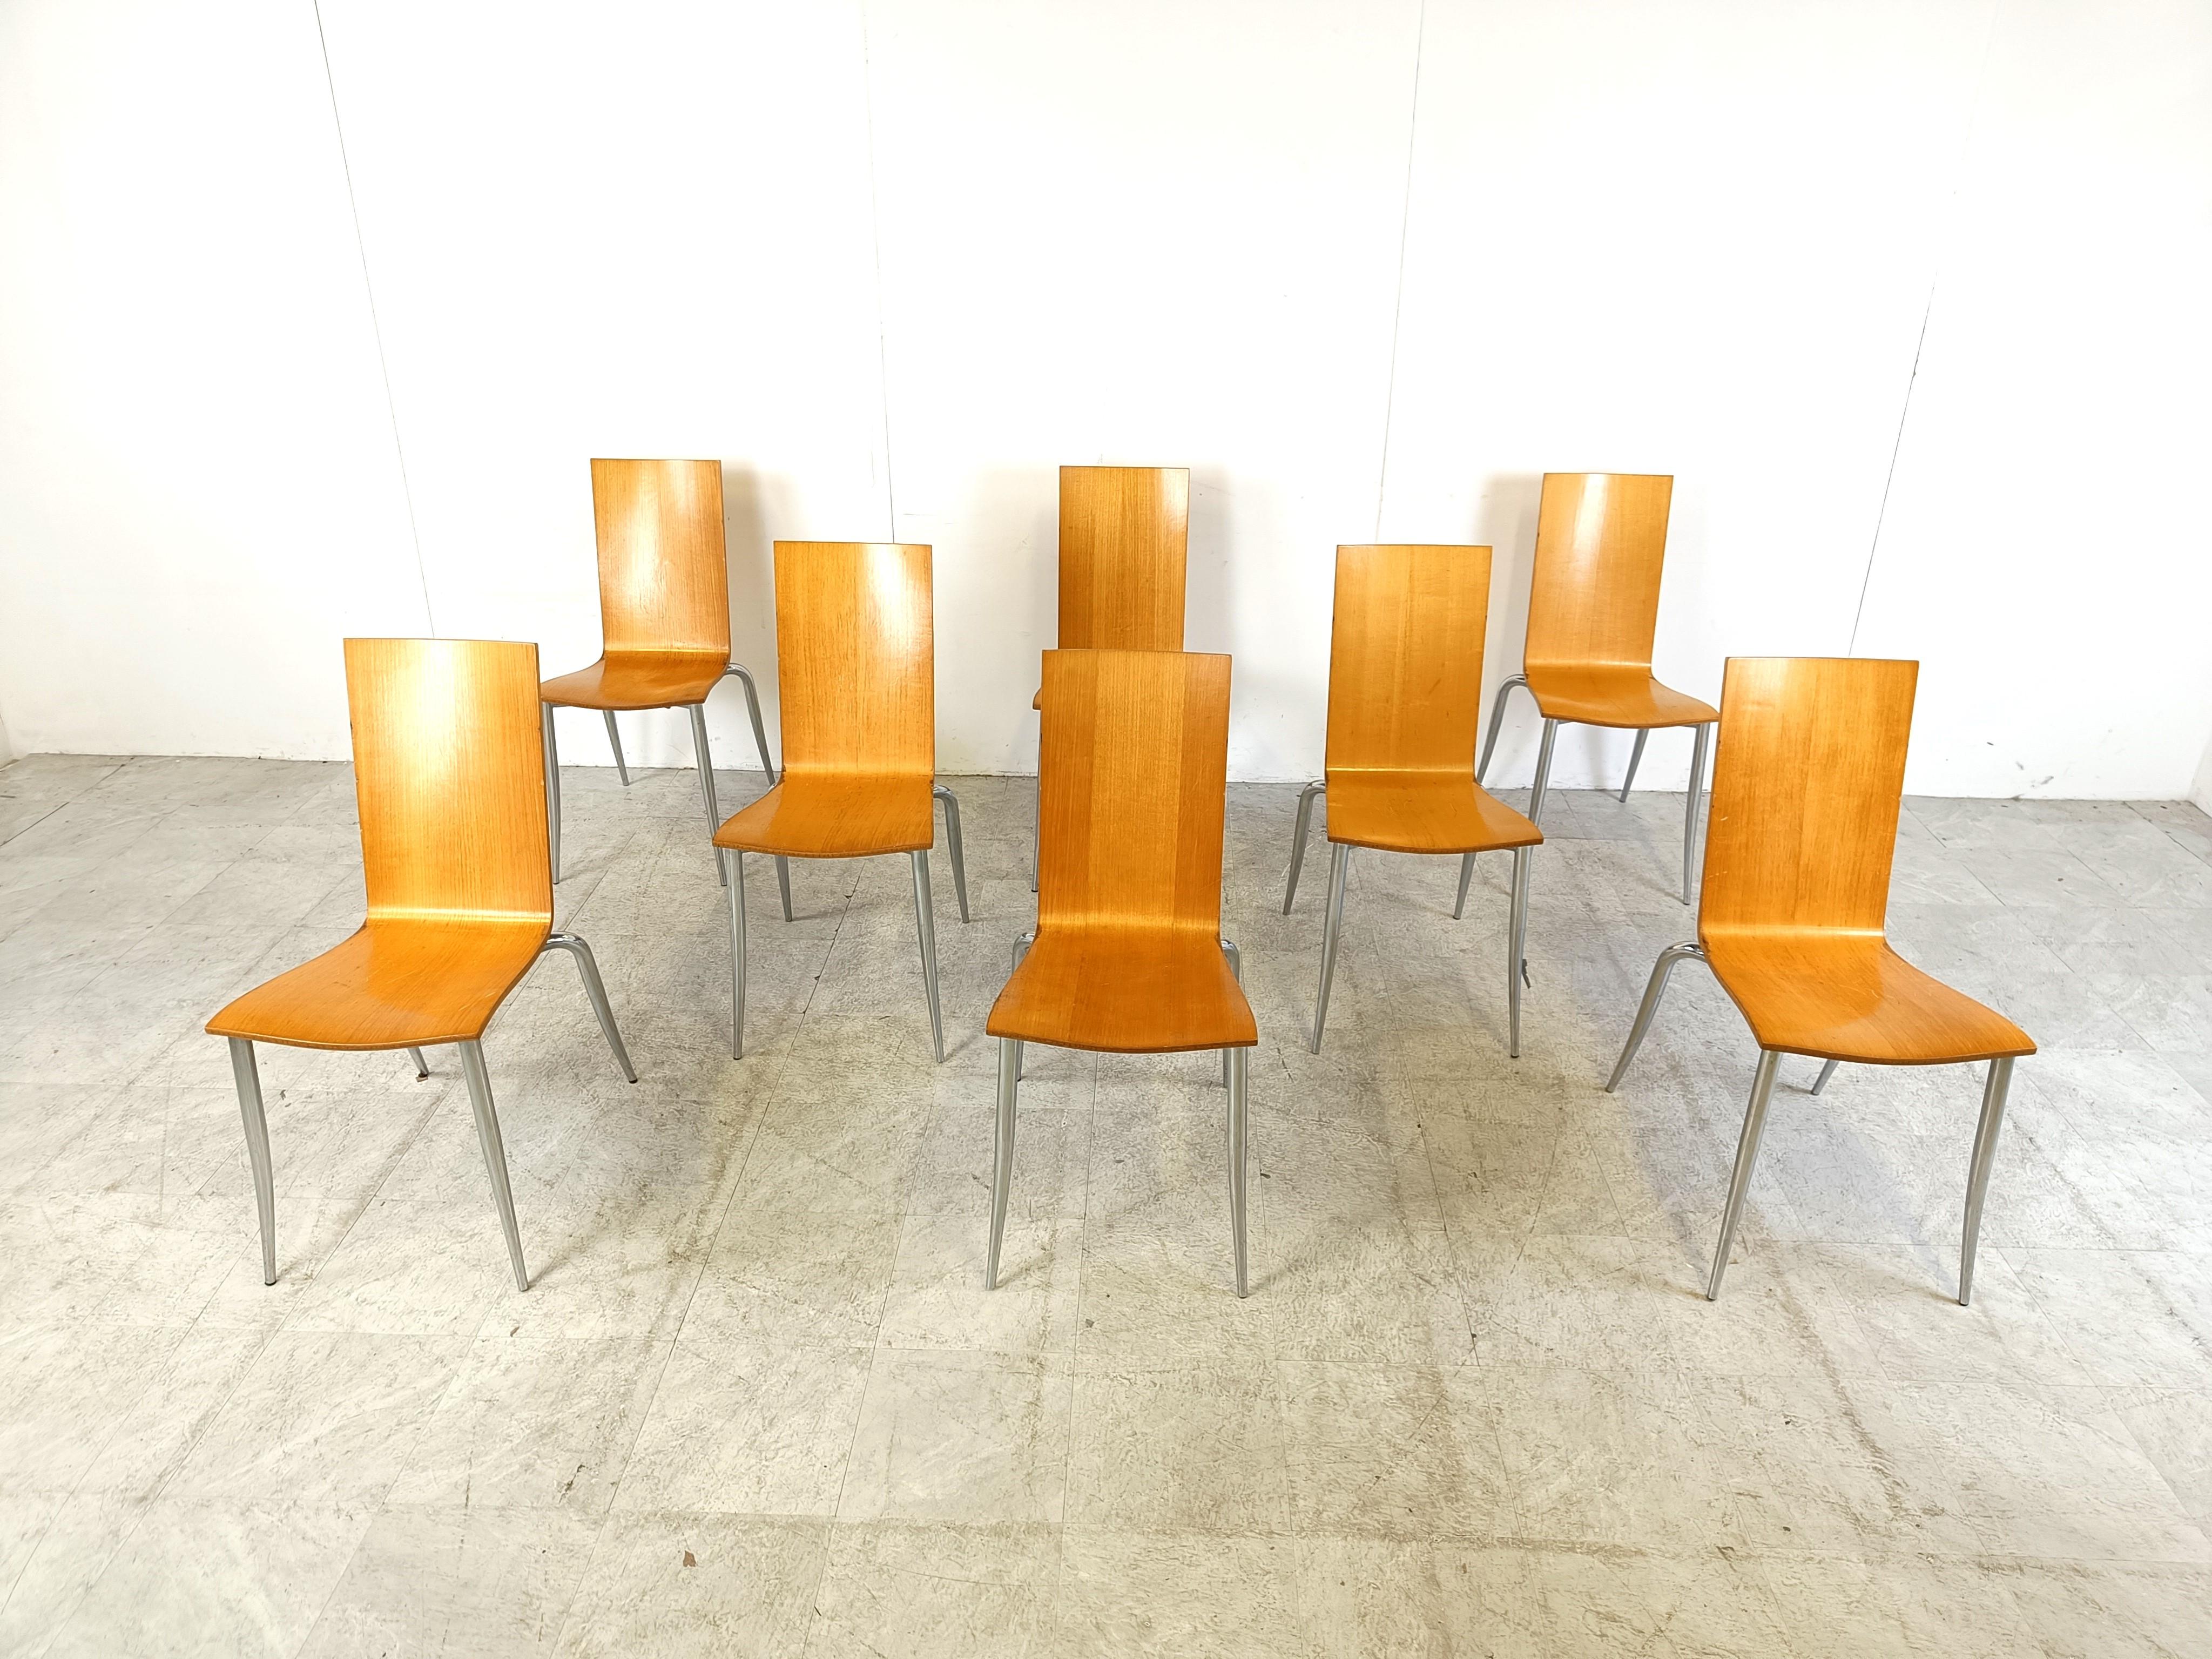 Set of 8 post modern 'Olly Tango' stackable dining chairs by Philippe Starck for Aleph.

Elegant design with chromed legs and wooden seats.

Good condition

1990s - Belgium

Dimenions:
Height: 90cm/35.43